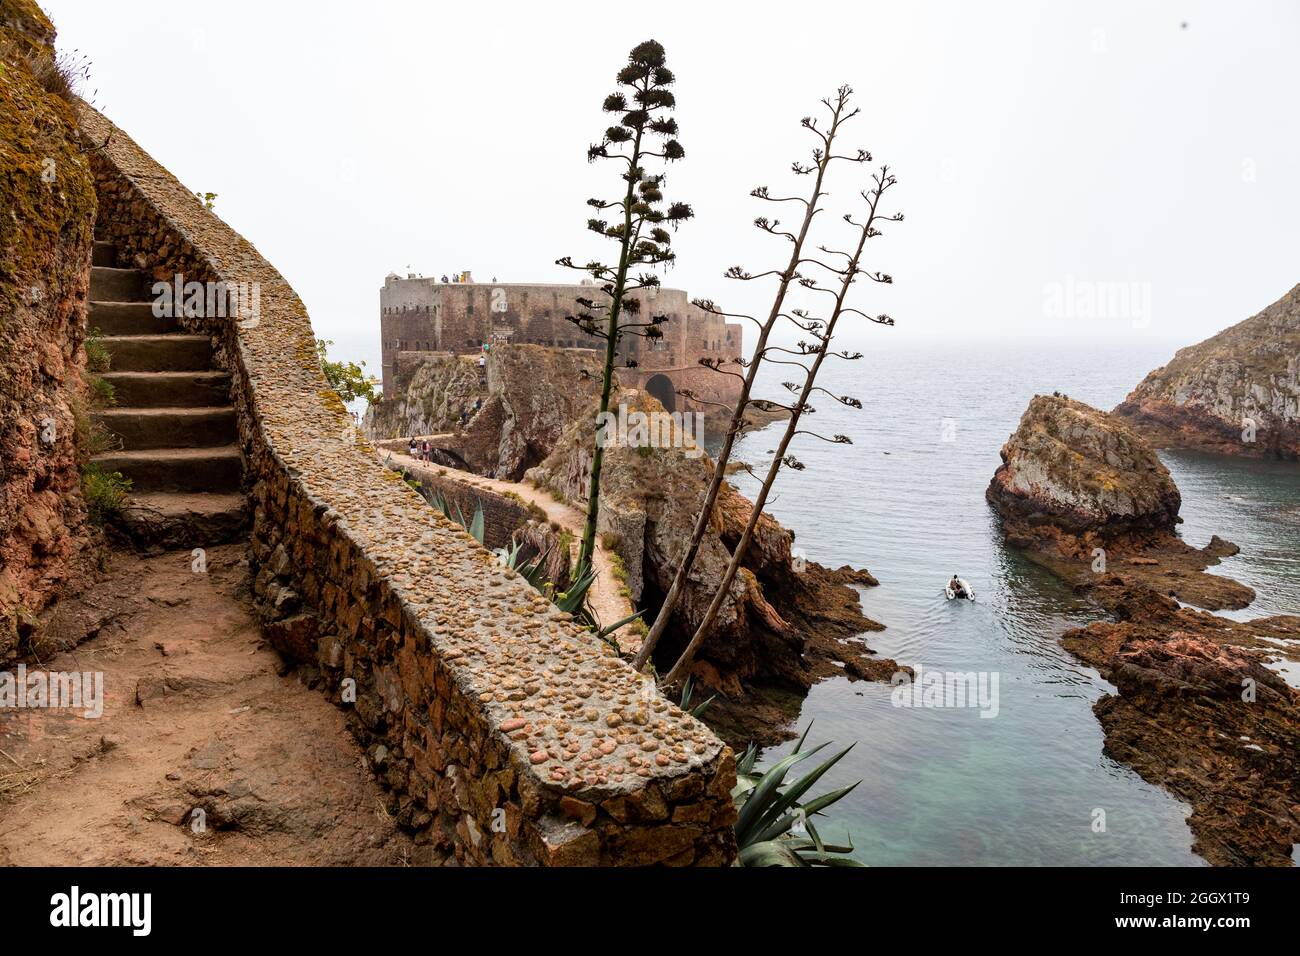 Pathway the Fort of St. John the Baptist in Berlenga Grande island, the largest island in the Berlengas archipelago, Portugal. Stock Photo